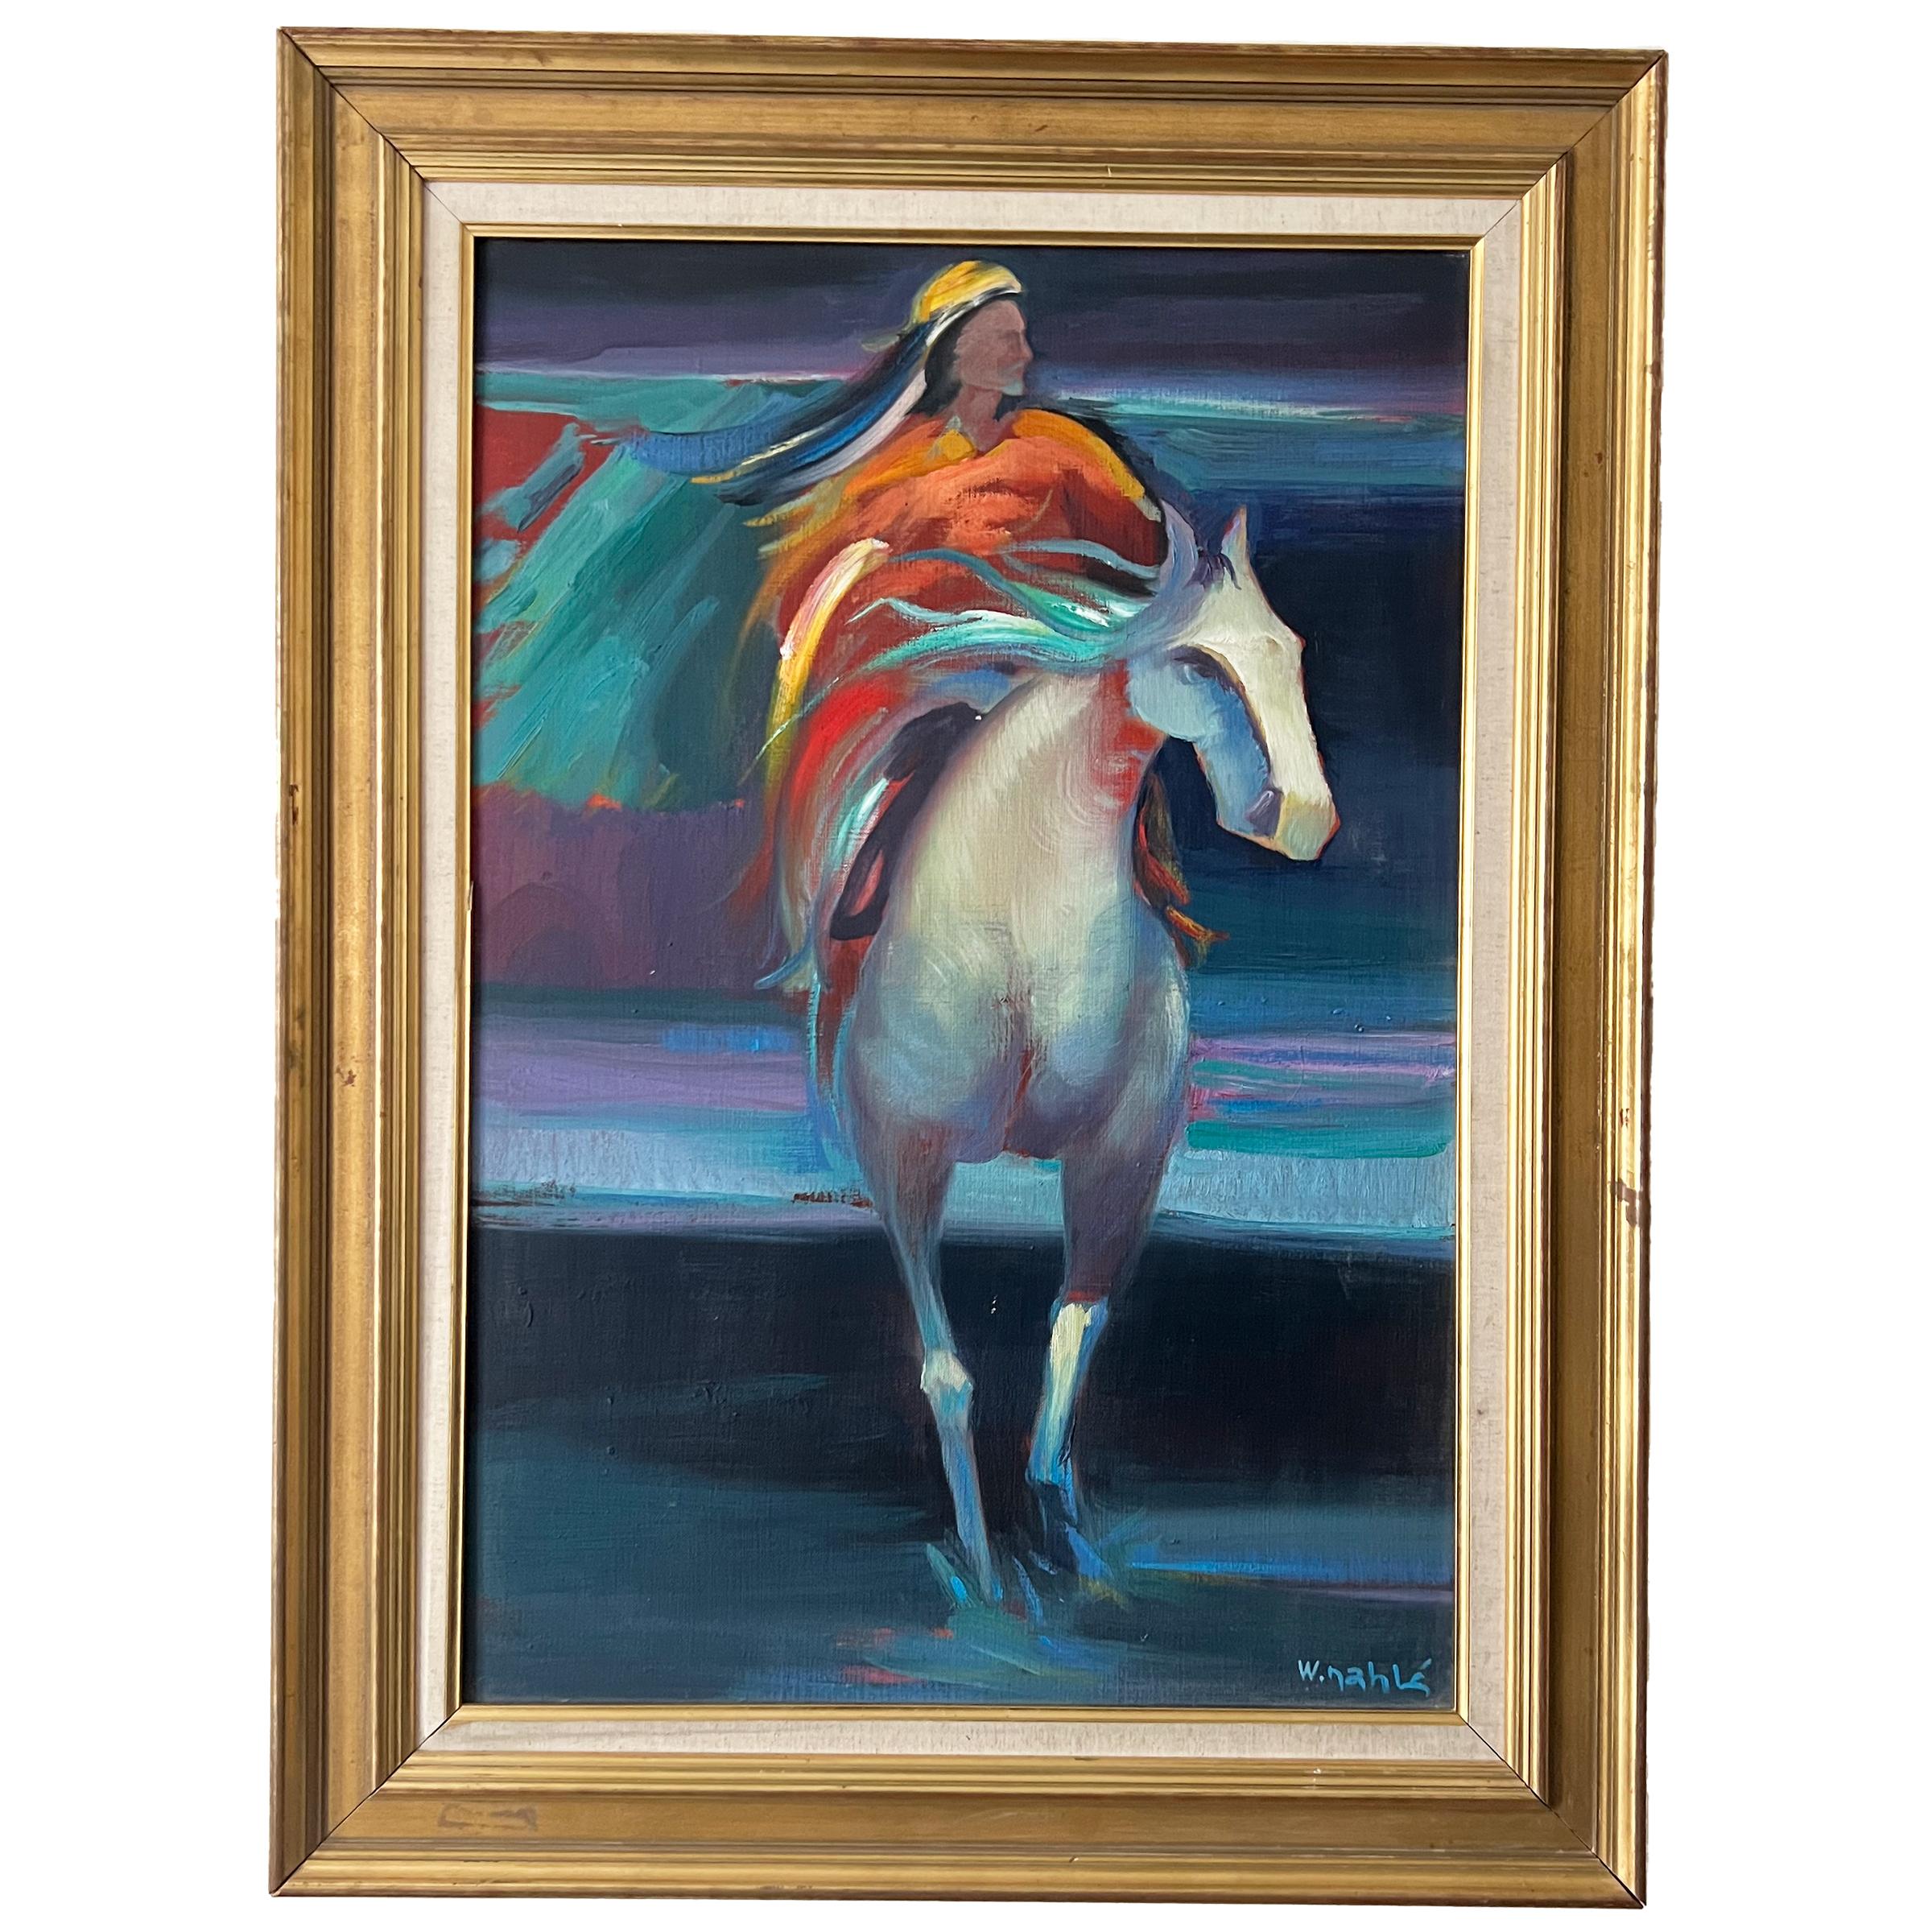 Oil on canvas painting features a dynamic scene of a woman riding a white horse. The background is awash in all shades of blue, creating a sense of motion and energy. The woman is dressed in an eye-catching orange dress, and her hair flies behind